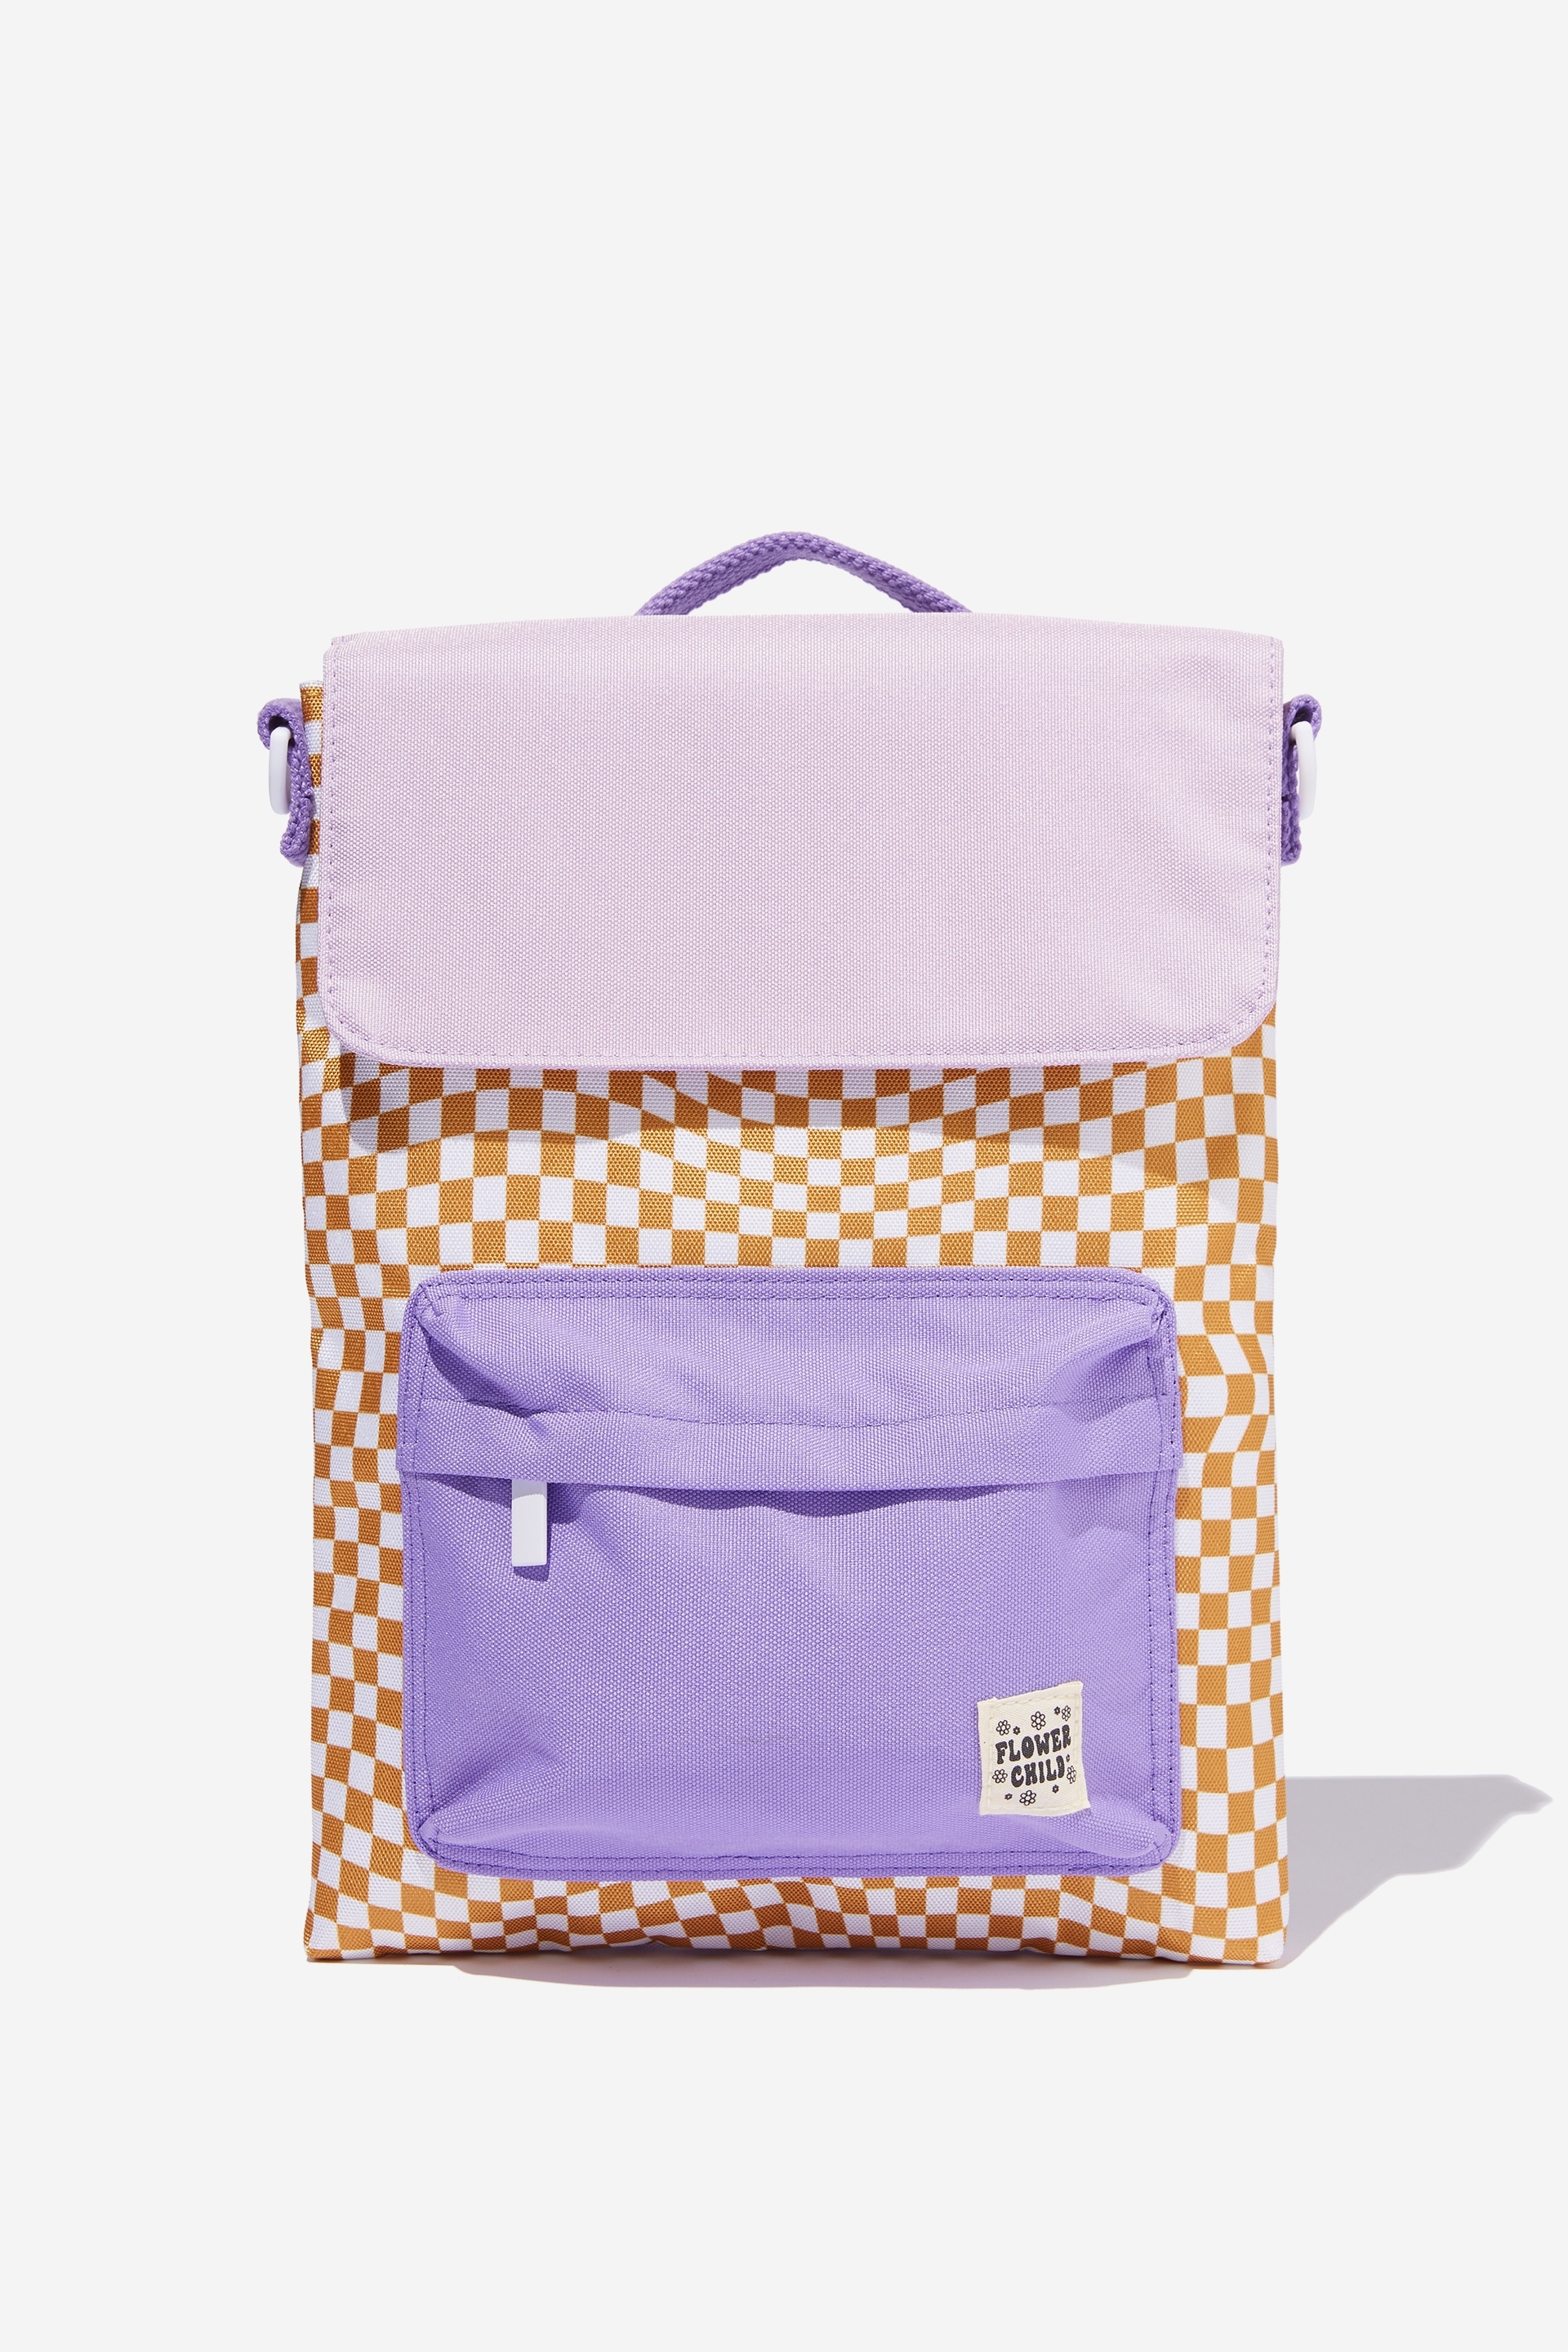 Cotton On Kids - Back To It Tablet Bag - Smokey lilac/warped checkerboard